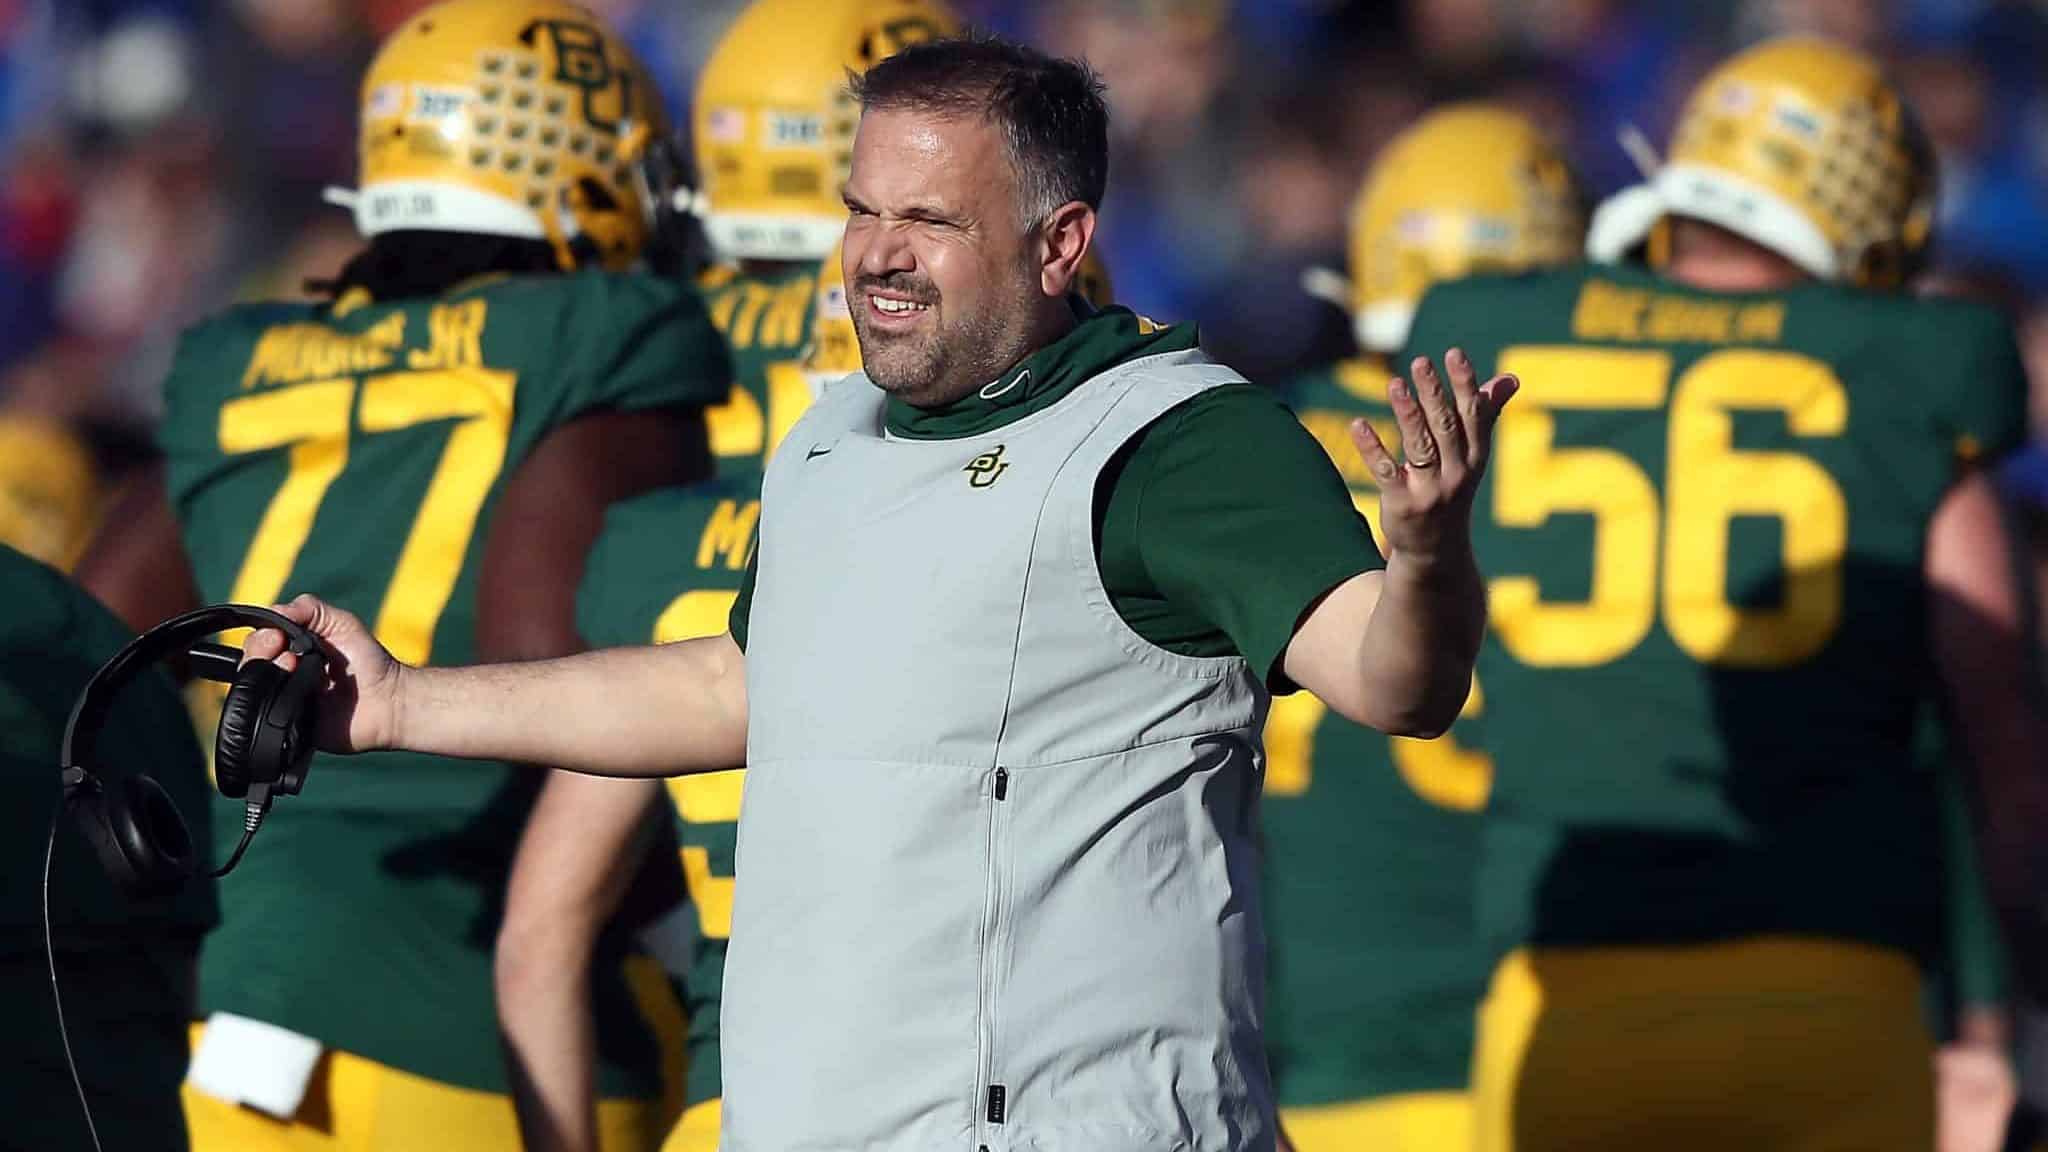 LAWRENCE, KANSAS - NOVEMBER 30: Head coach Matt Rhule of the Baylor Bears reacts on the sidelines during the game against the Kansas Jayhawks at Memorial Stadium on November 30, 2019 in Lawrence, Kansas.